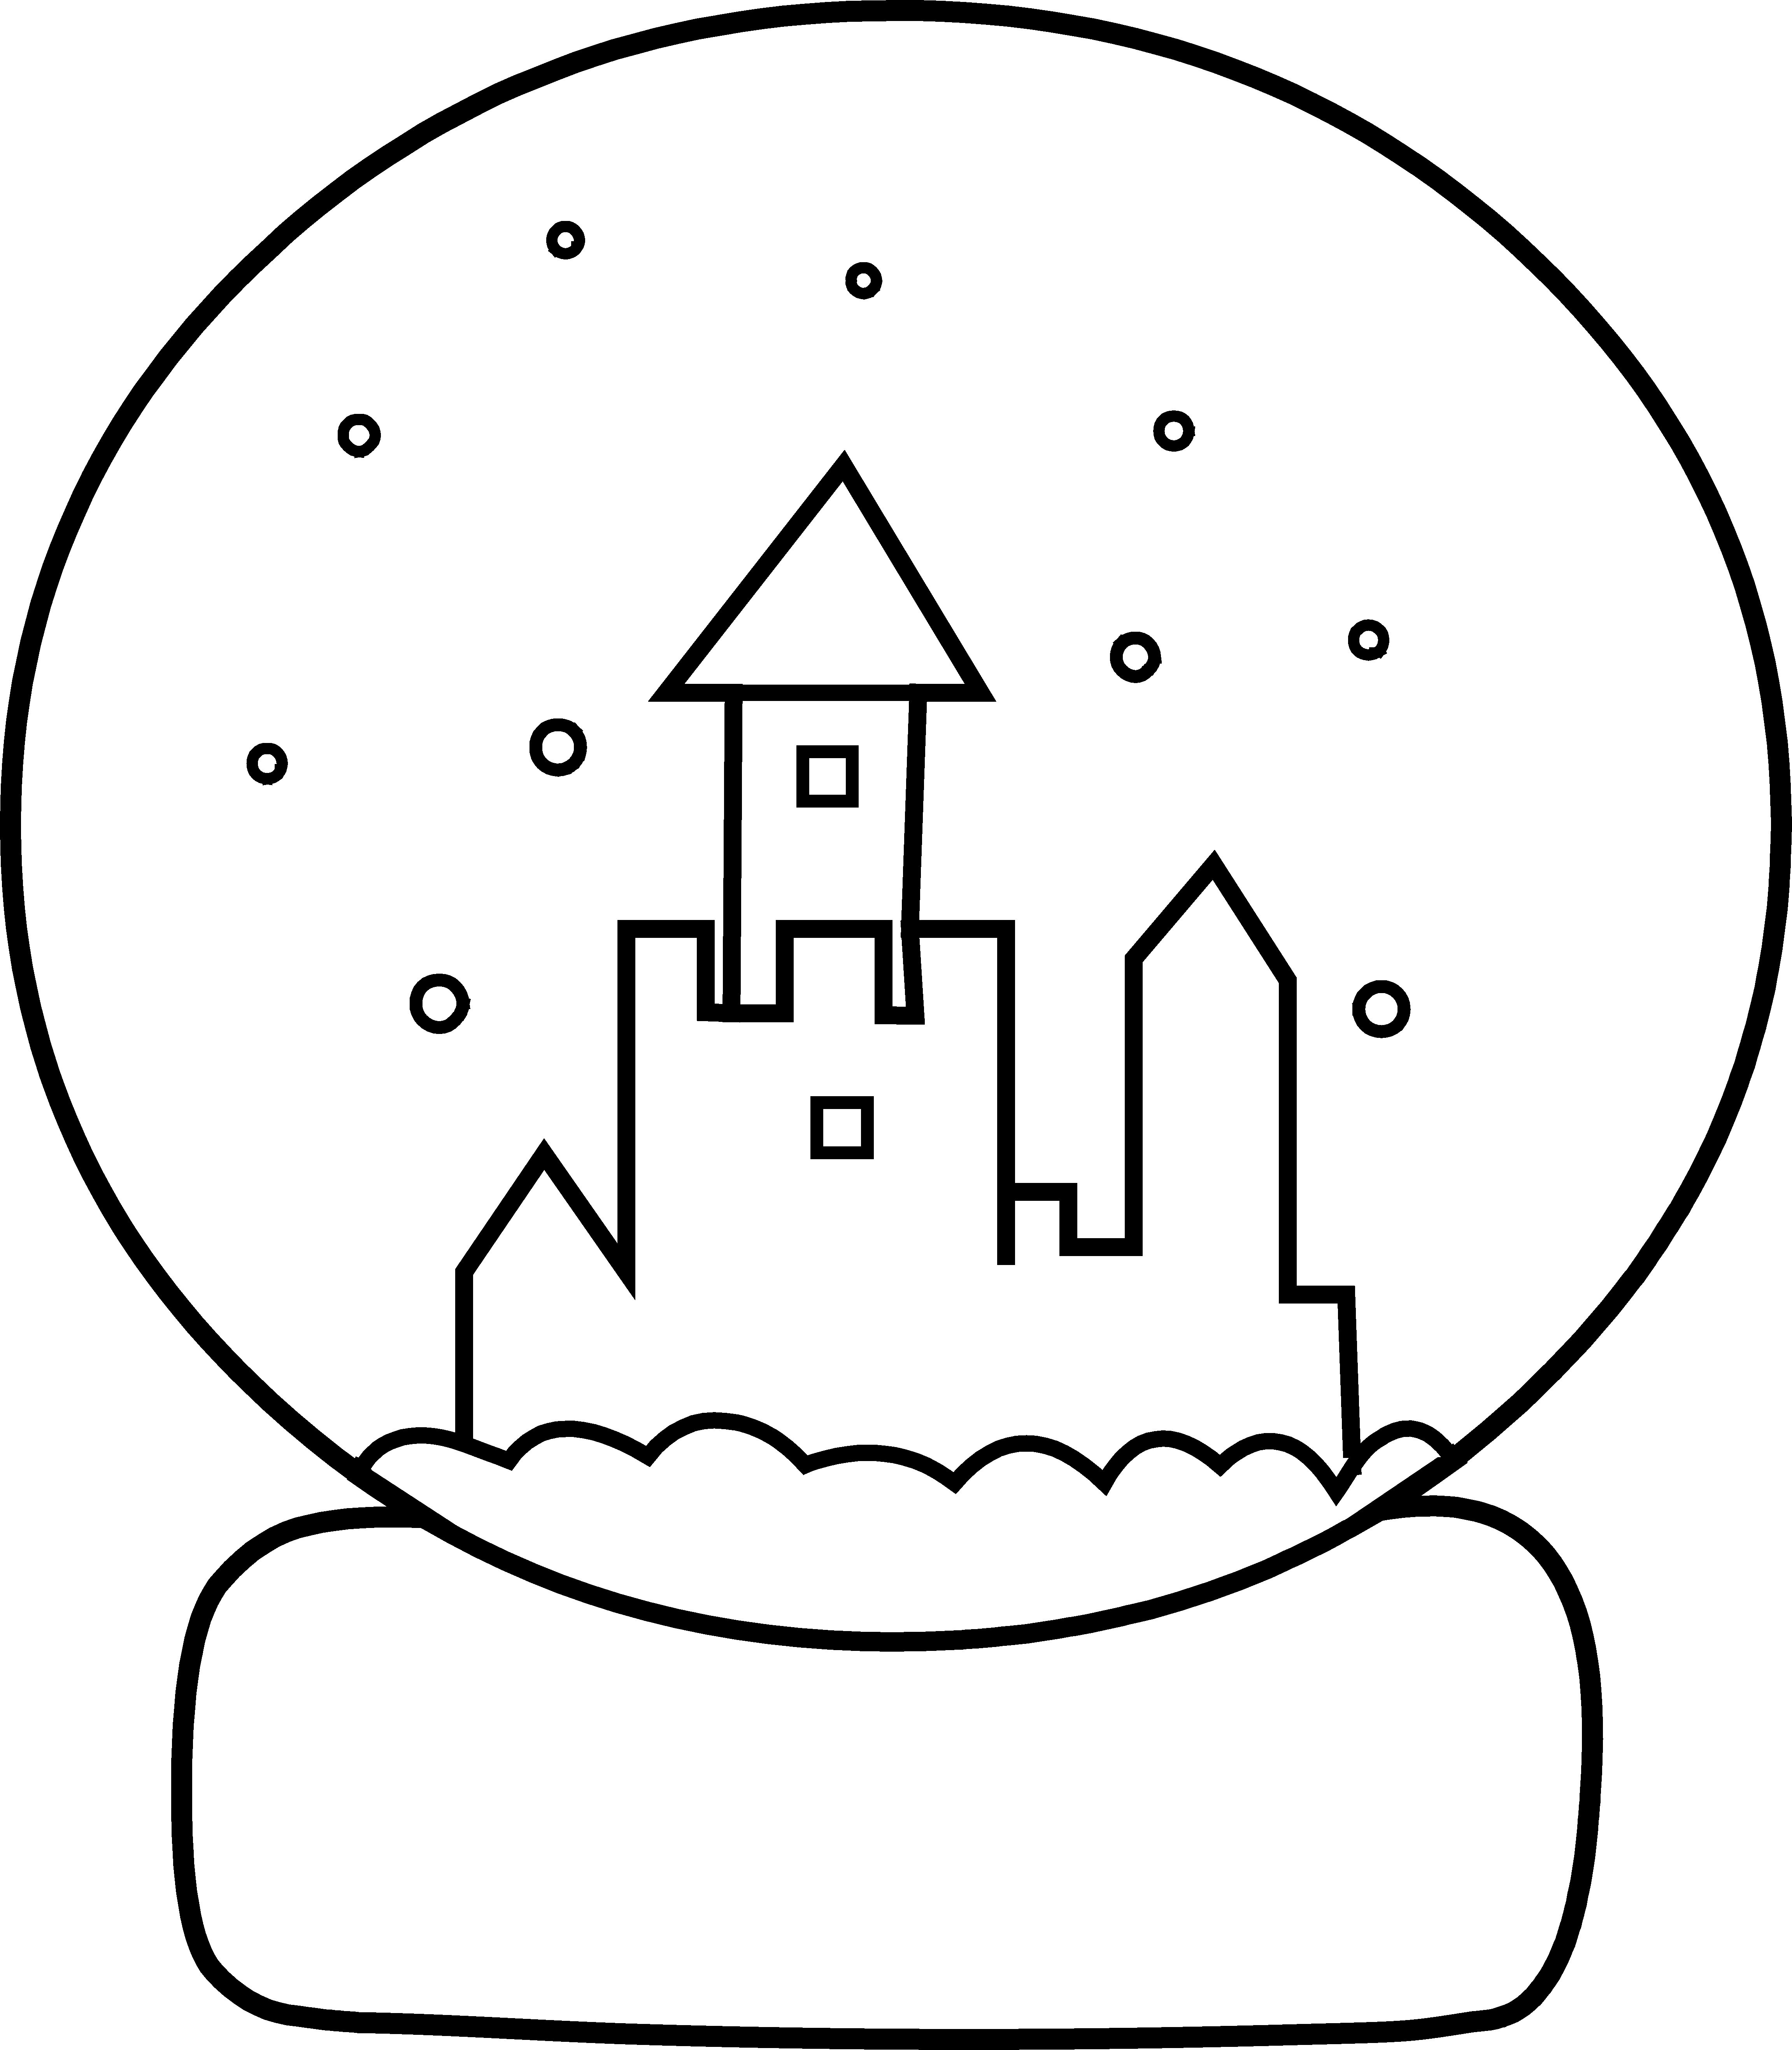 Cute Snow Globe Coloring Page - Coloring Book (4606x5270)